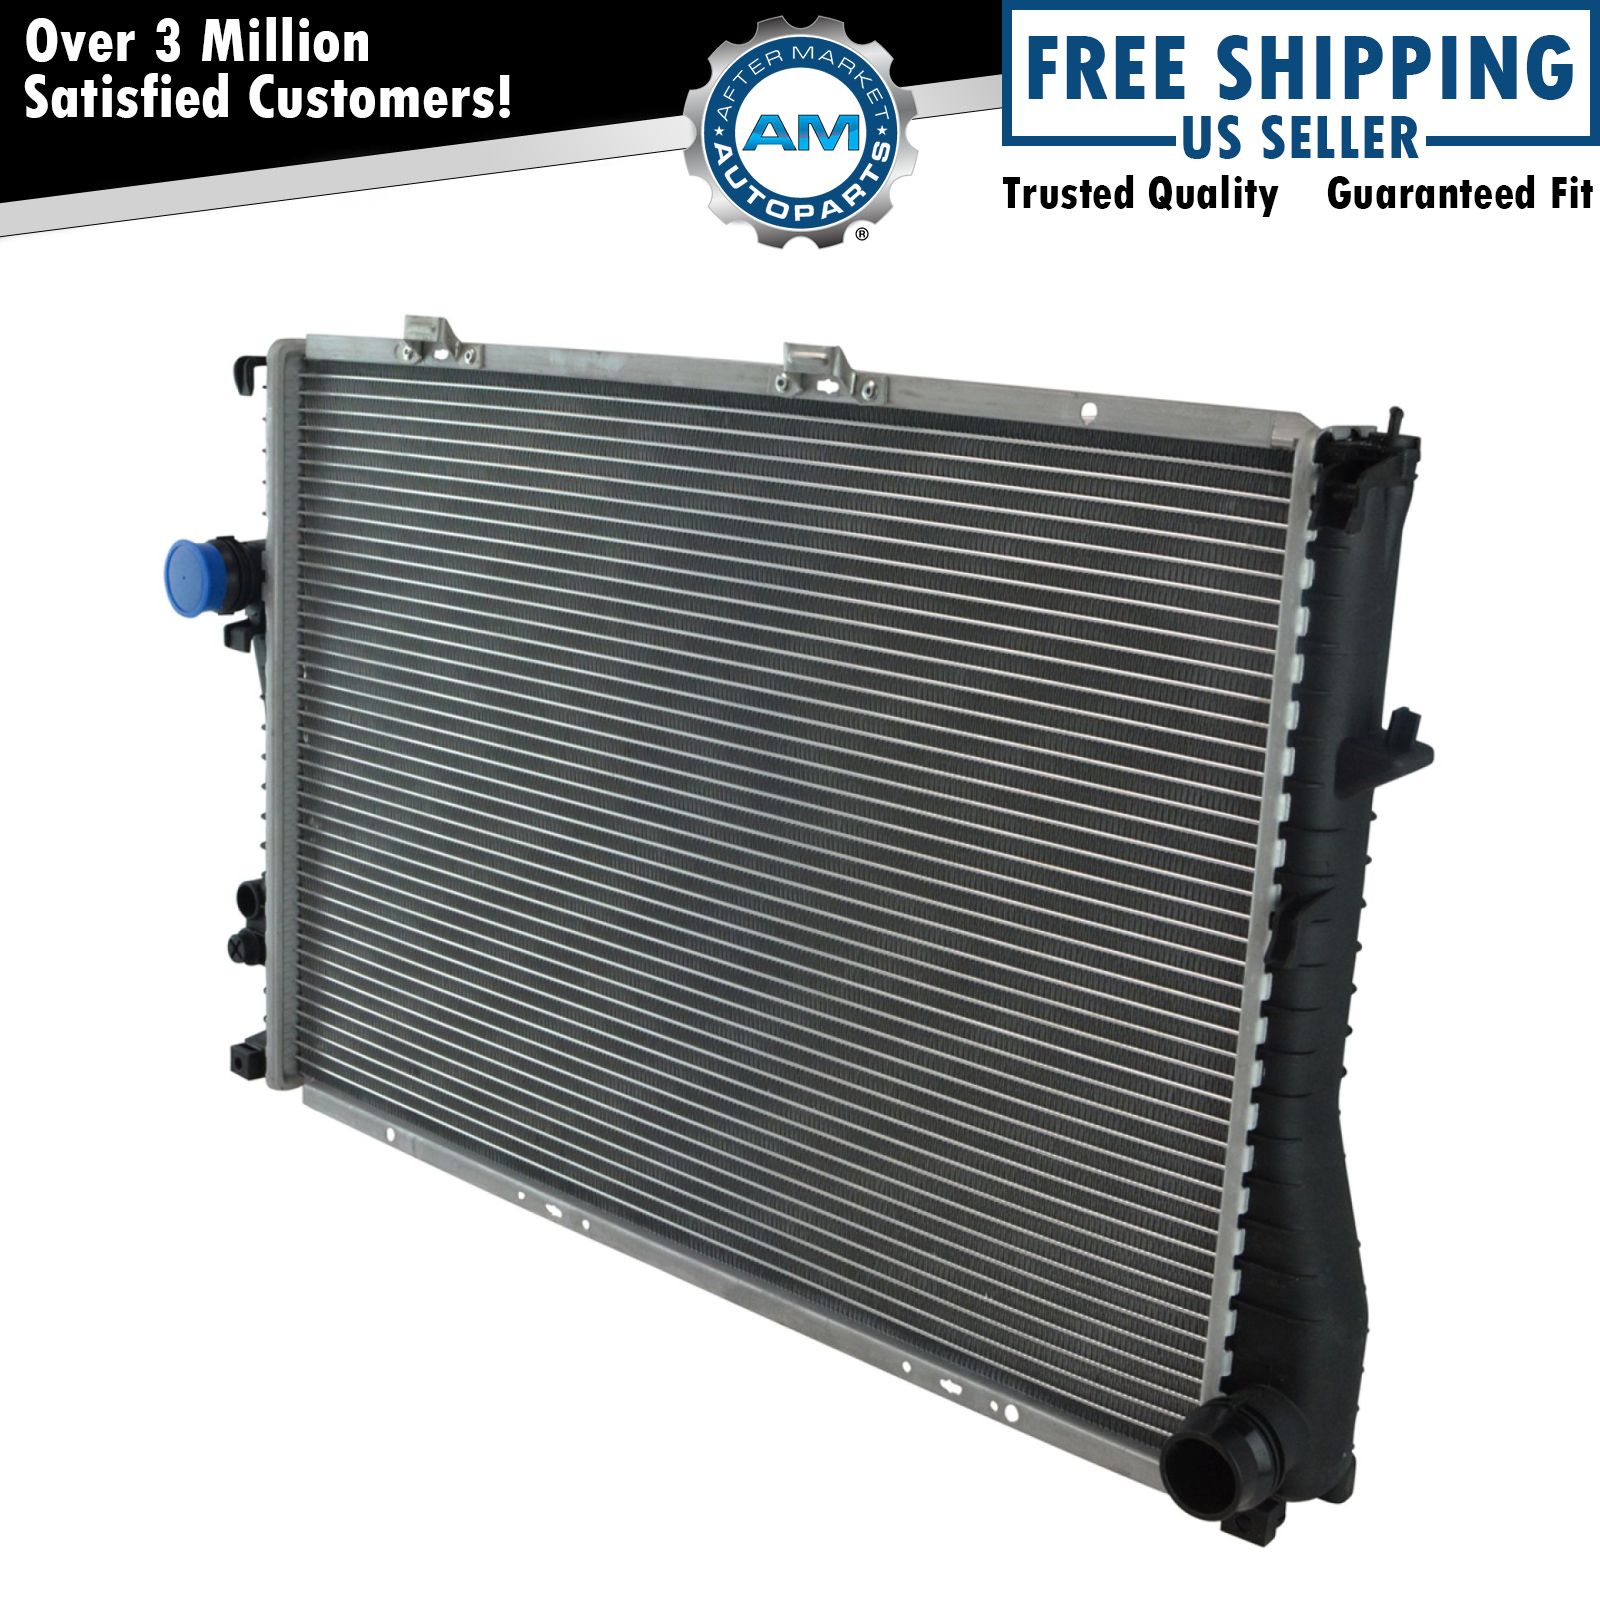 Radiator Assembly Aluminum Core Direct Fit for BMW 540i 545i Z8 740il New